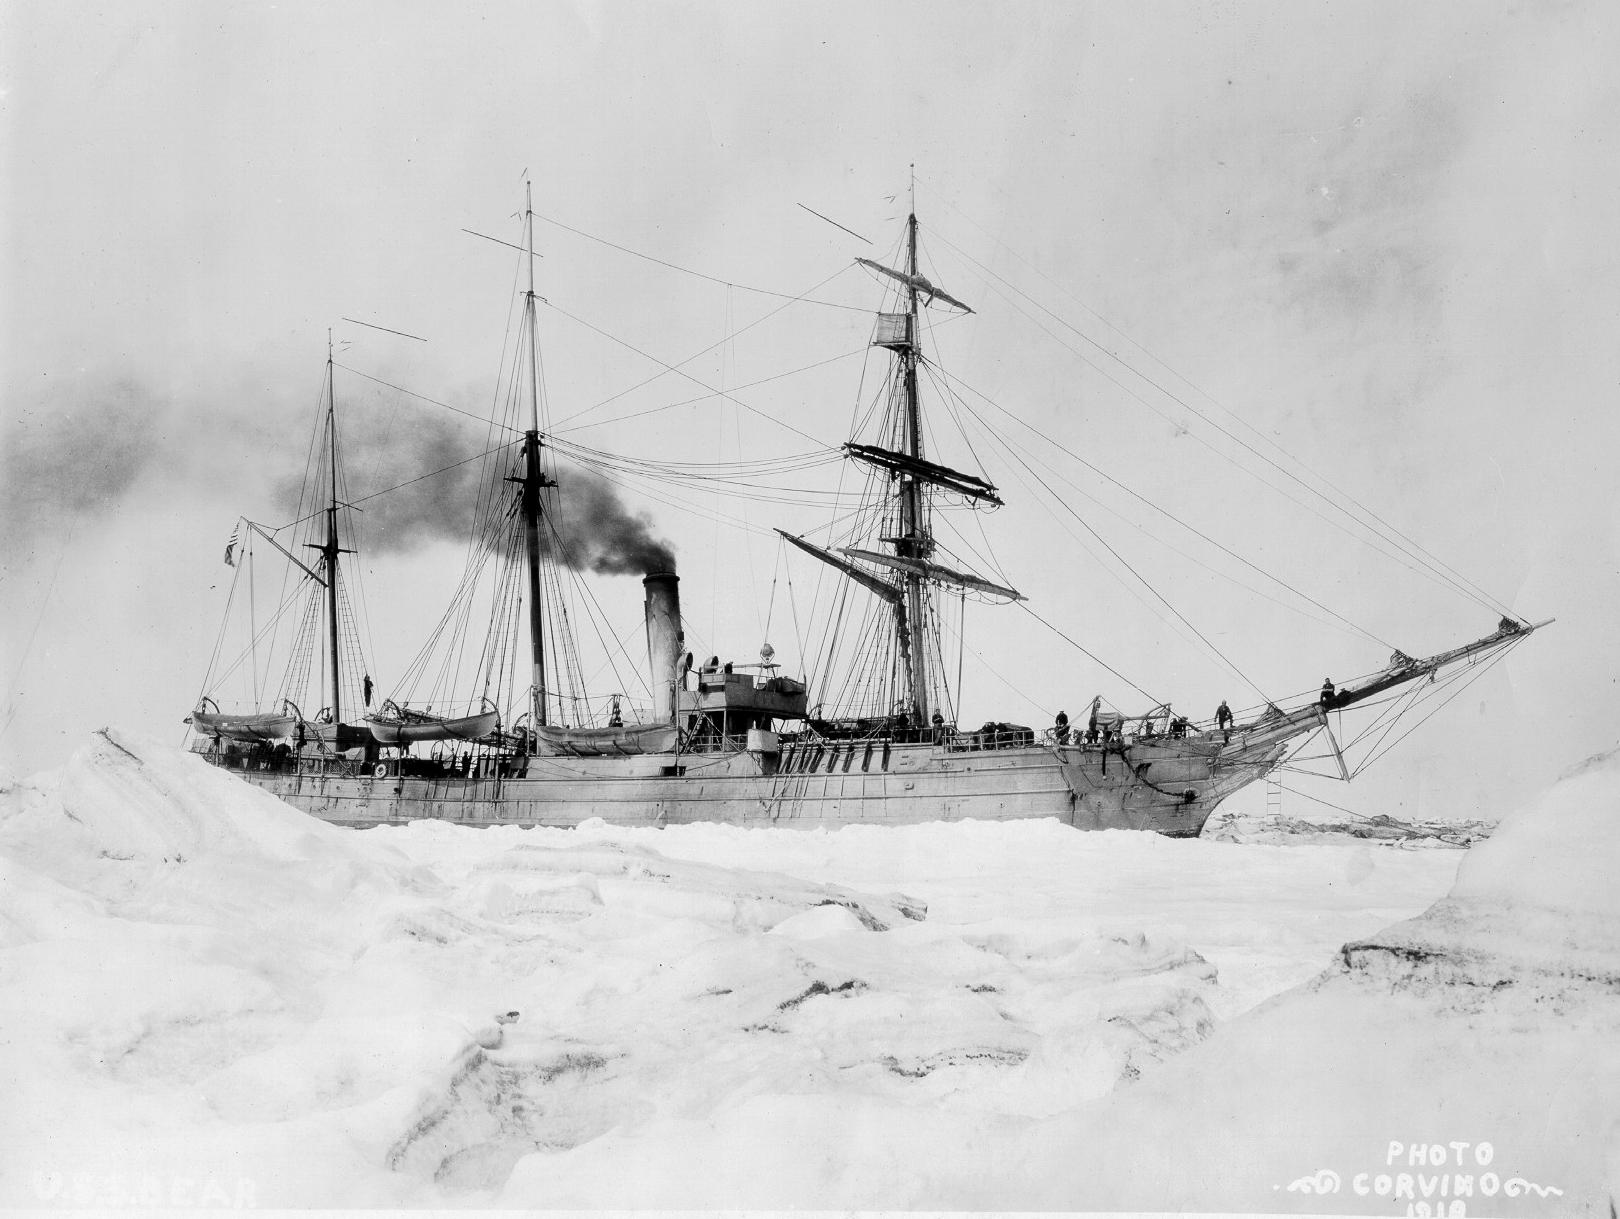 Why Climate Scientists Are So Intrigued By The Brutal Sea Voyages Of The 19th Century